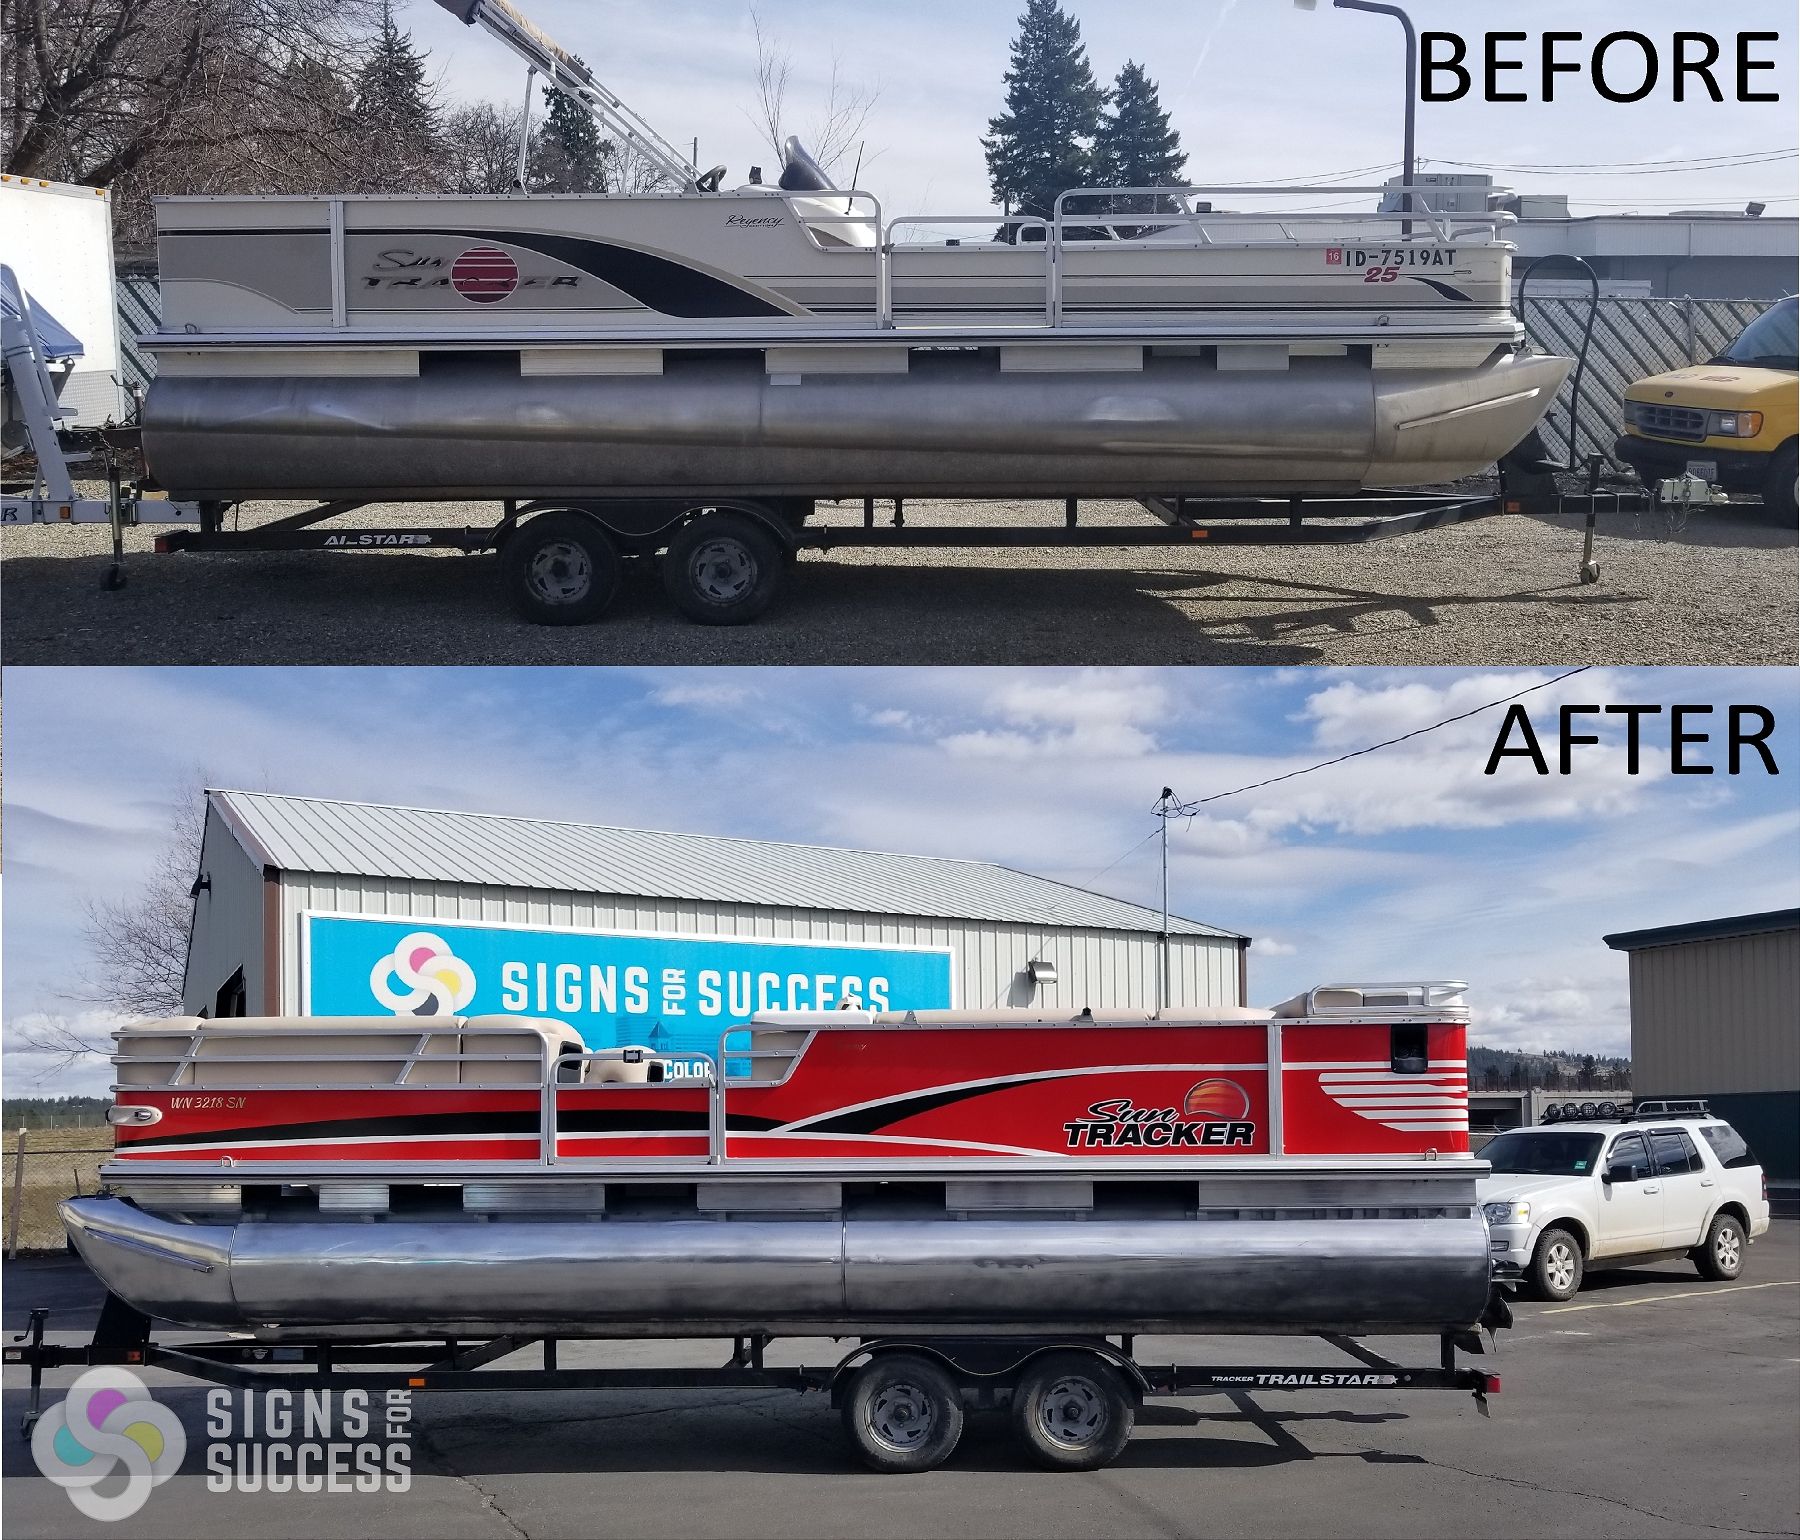 Sun Tracker Pontoon Boat Wrap - Signs for Success